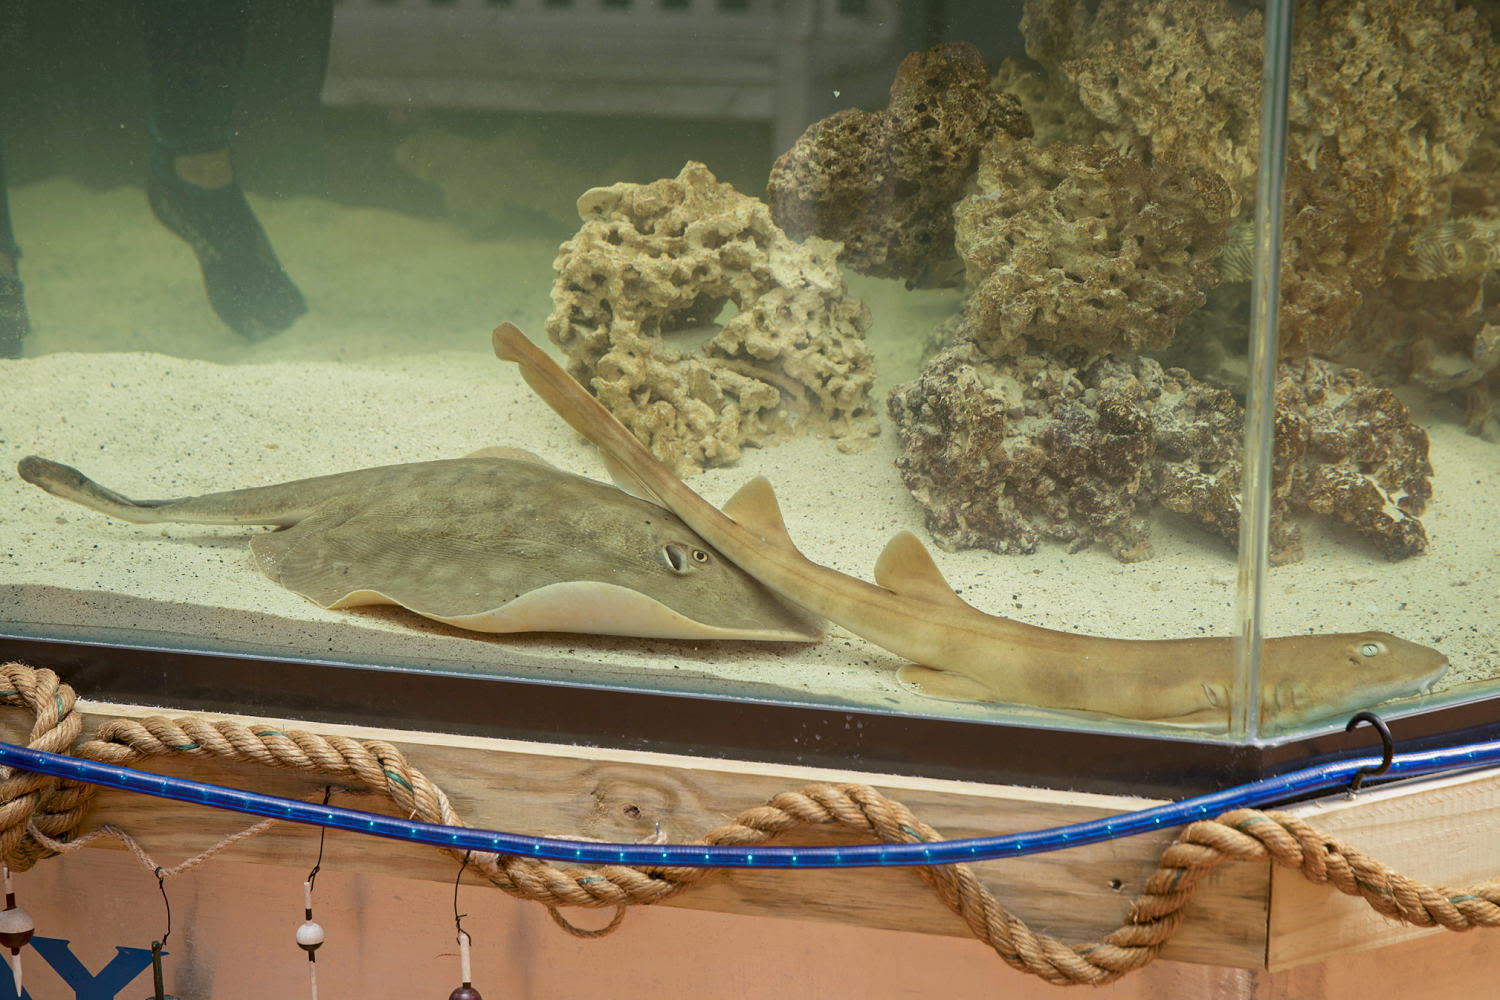 Stingray that sparked curiosity over mysterious pregnancy has died